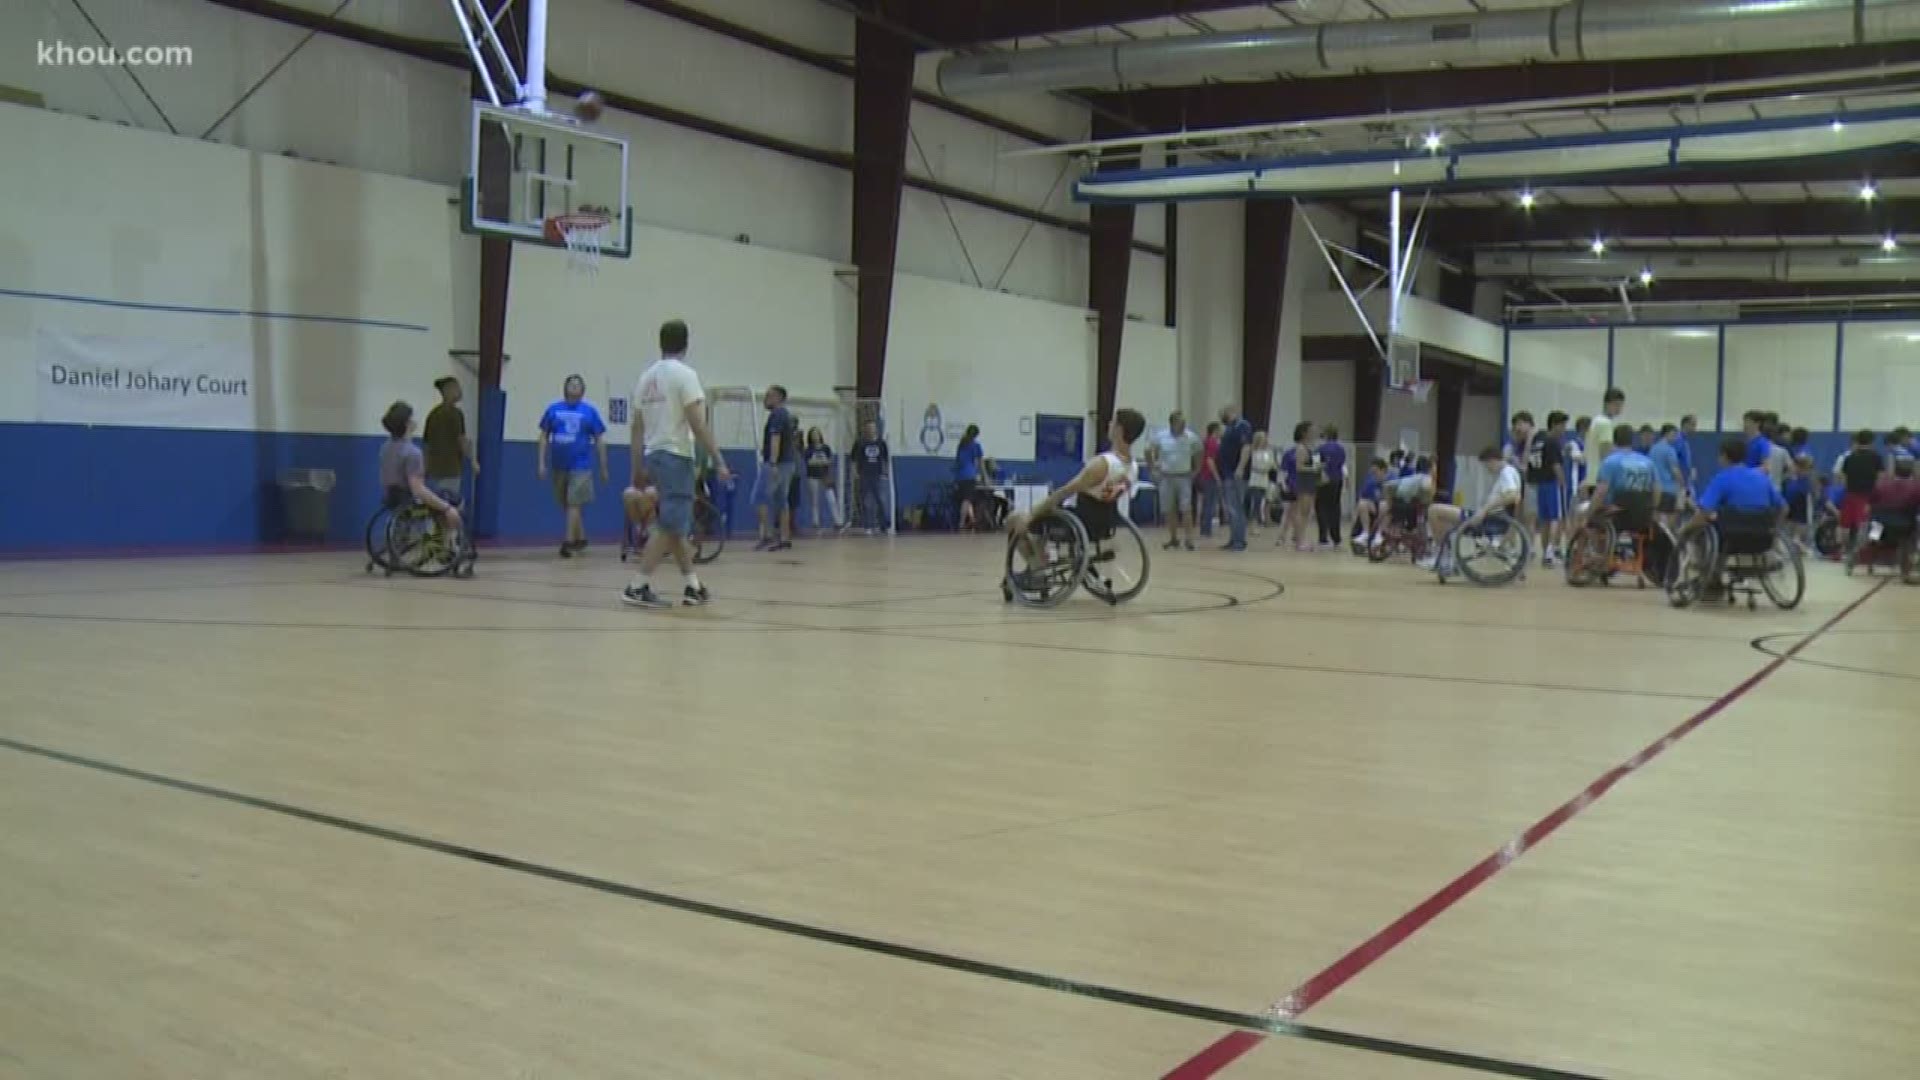 A Jewish High School youth group organized a youth basketball tournament for teens in wheelchairs.